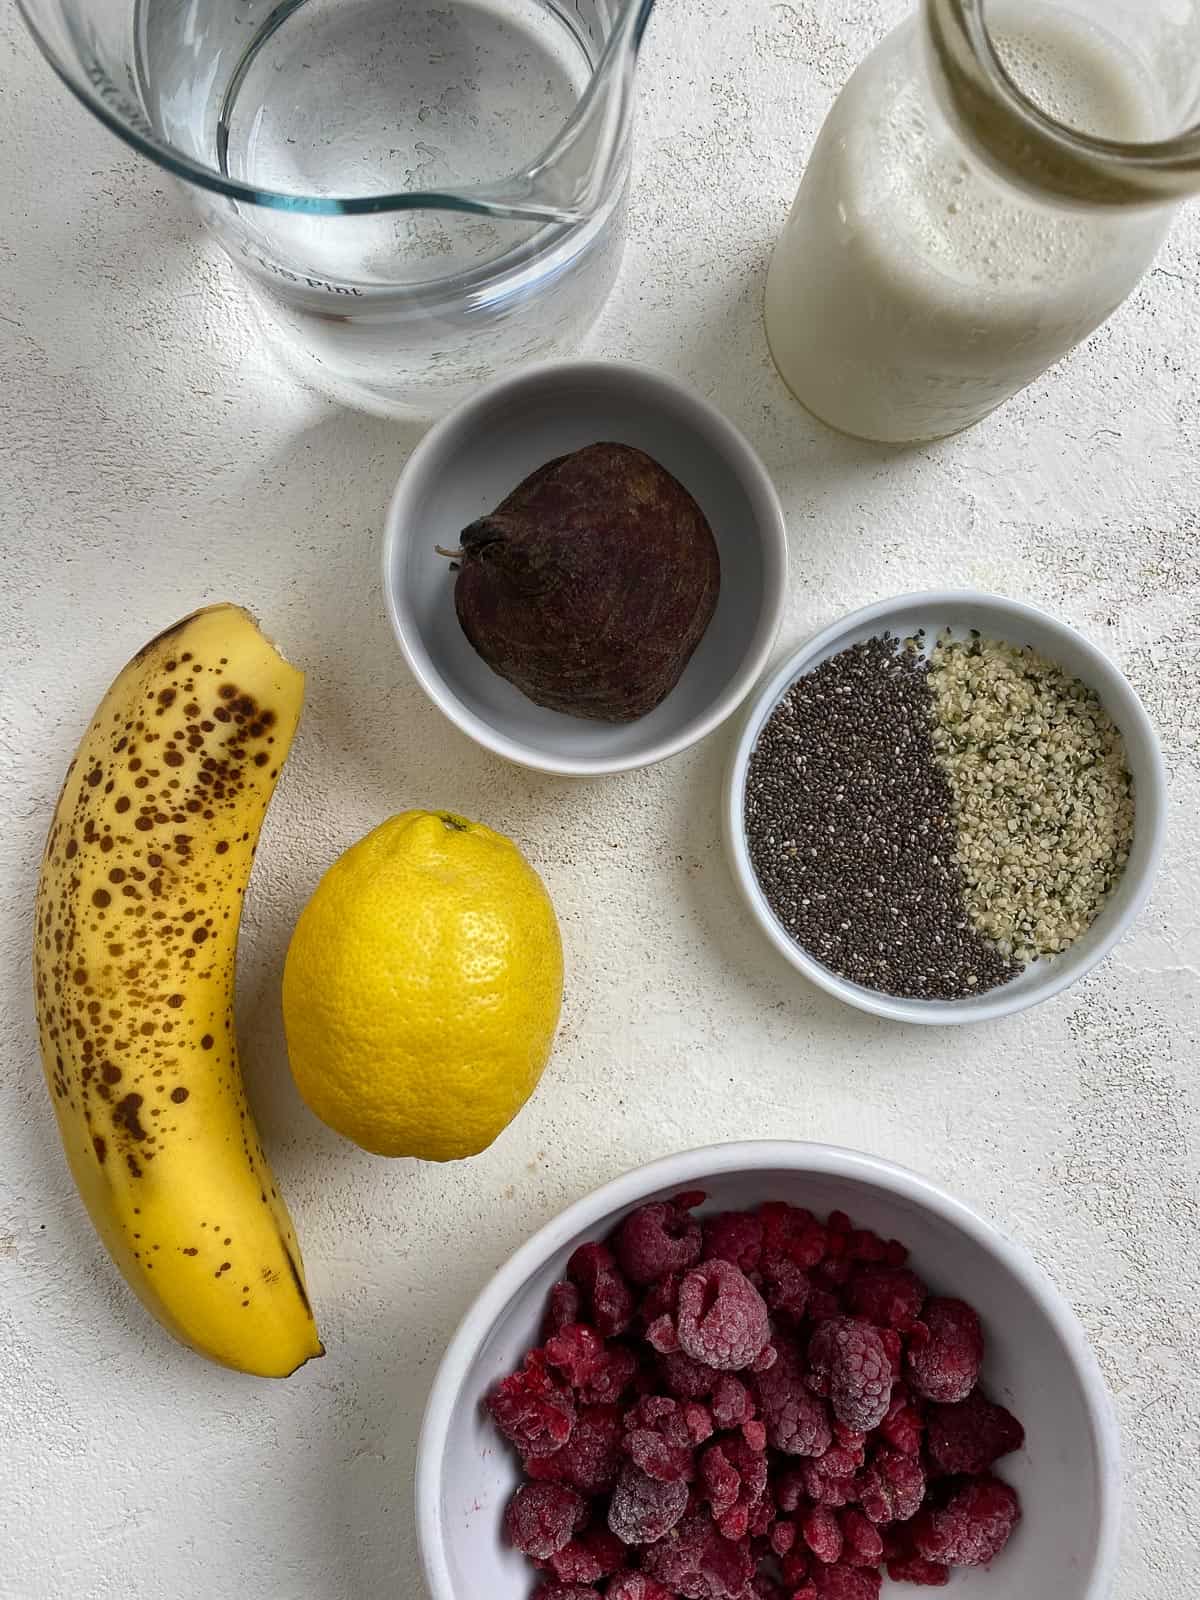 ingredients for Banana Beet Smoothie measured out against a white surface